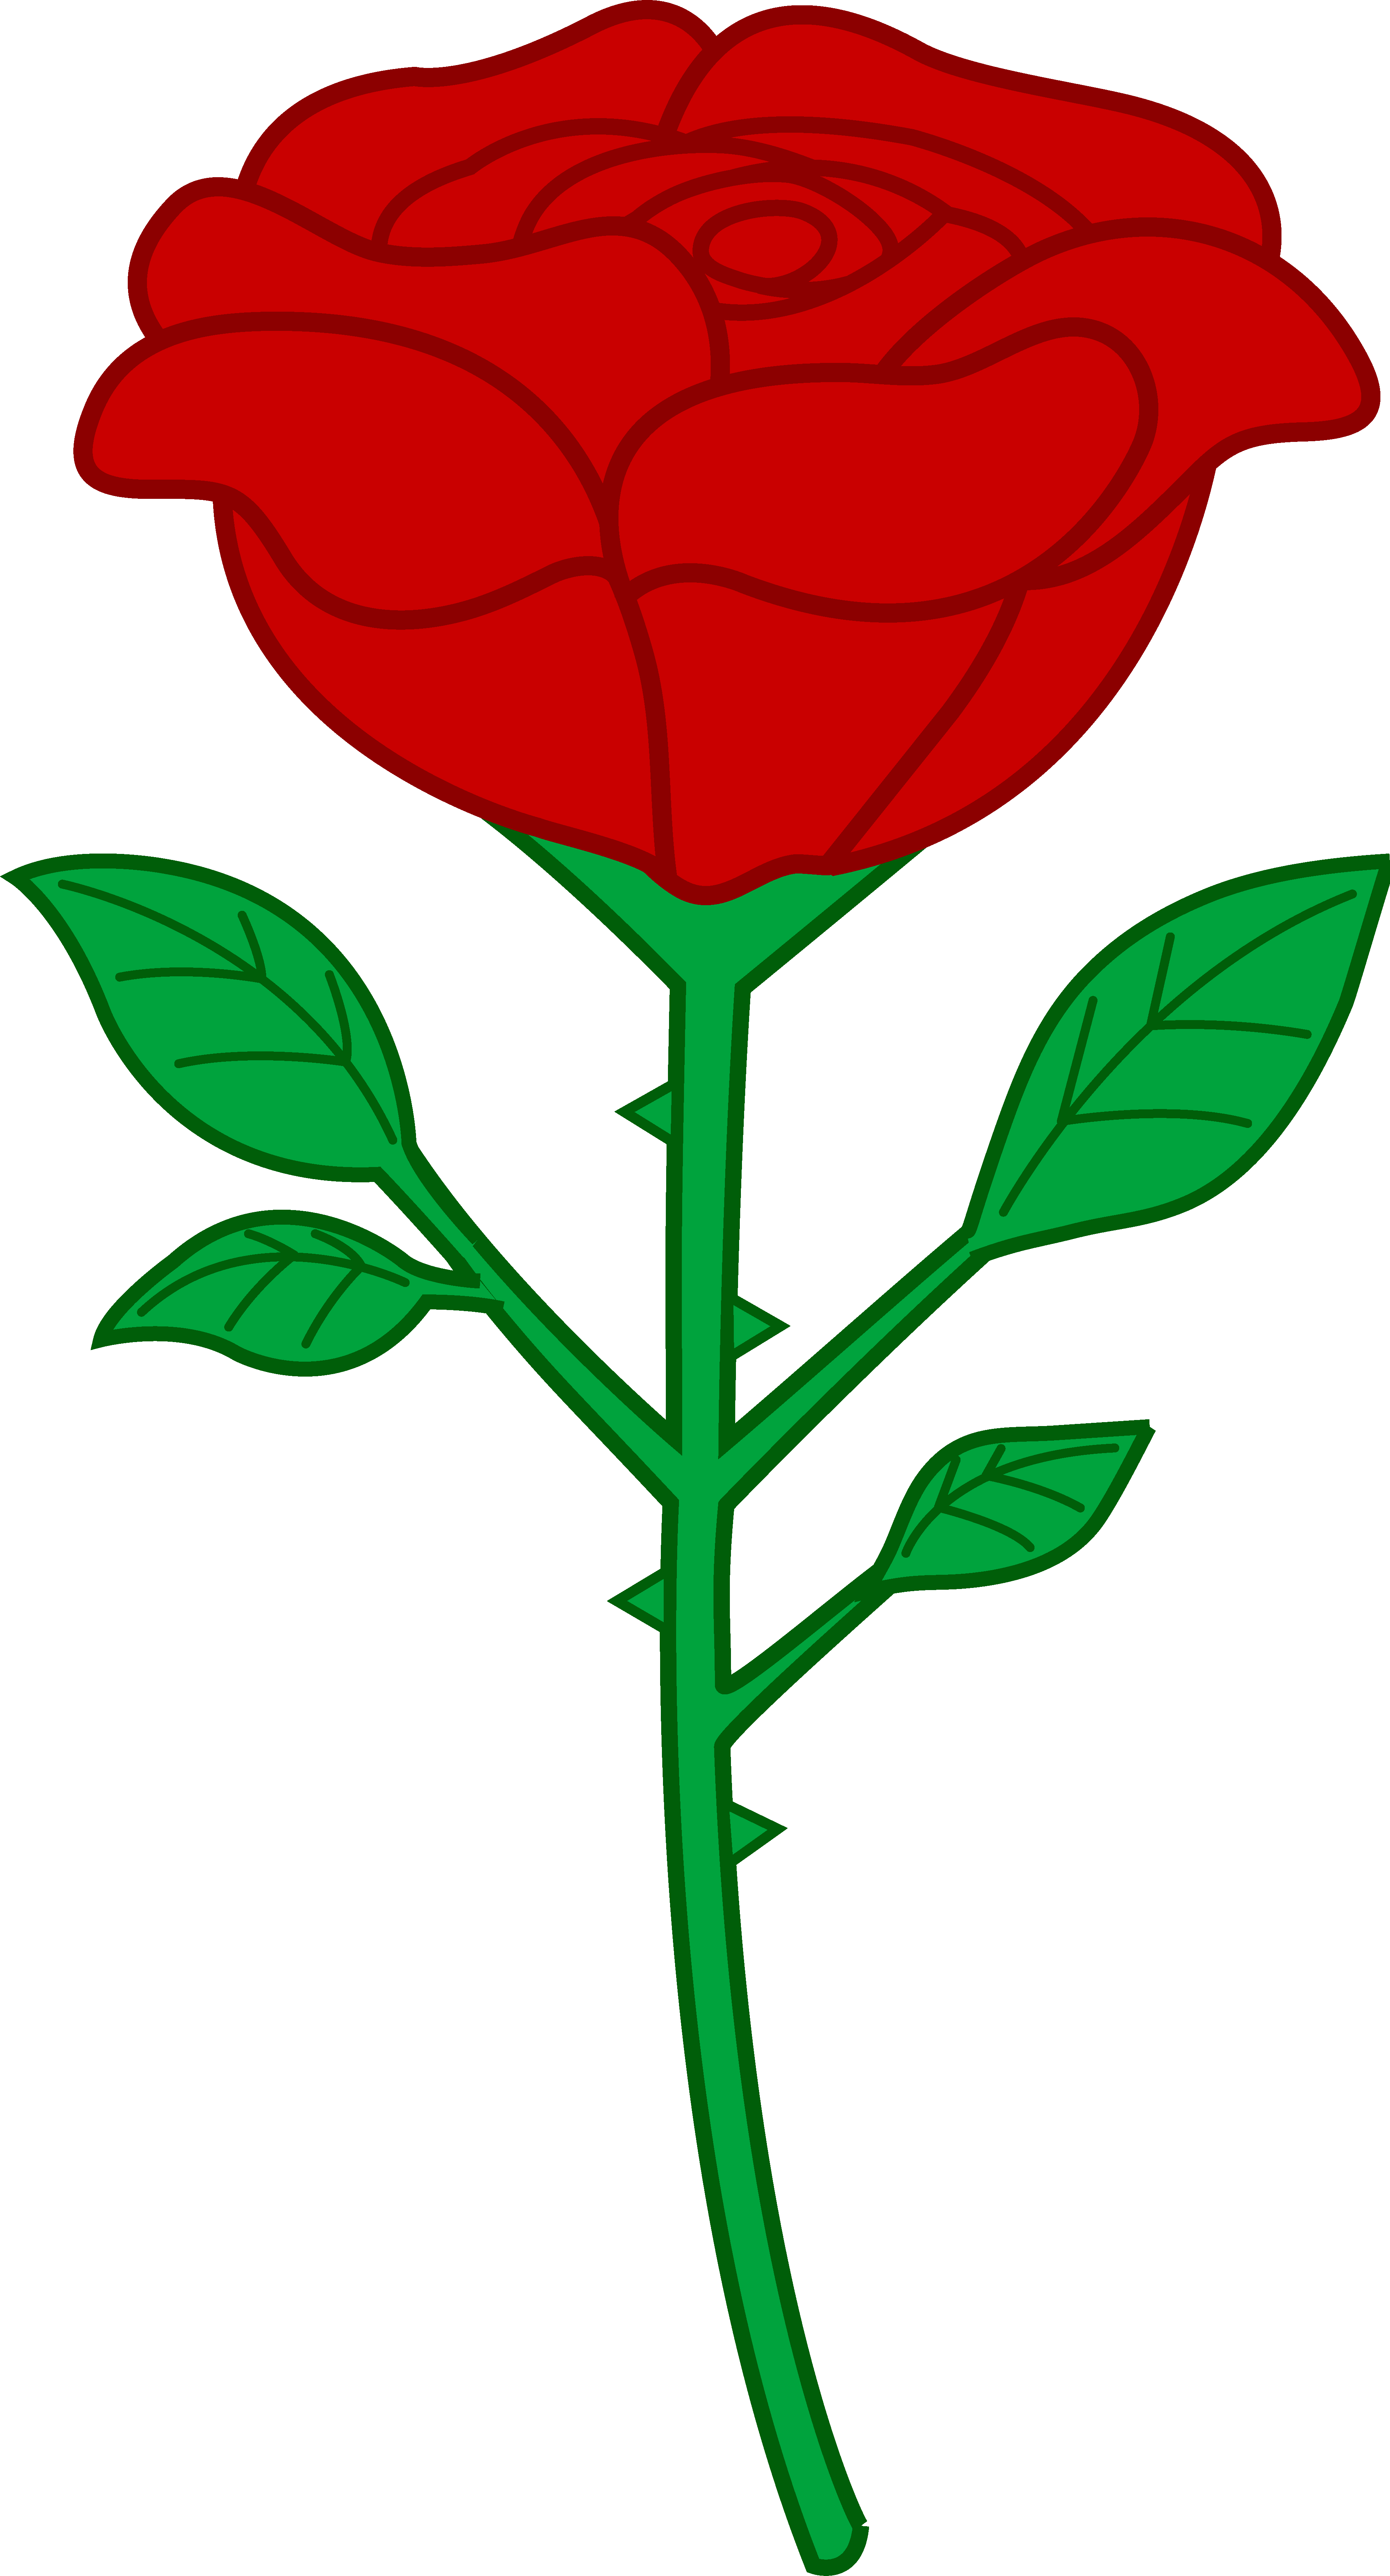 Red Rose Outline Clipart | Clipart library - Free Clipart Images